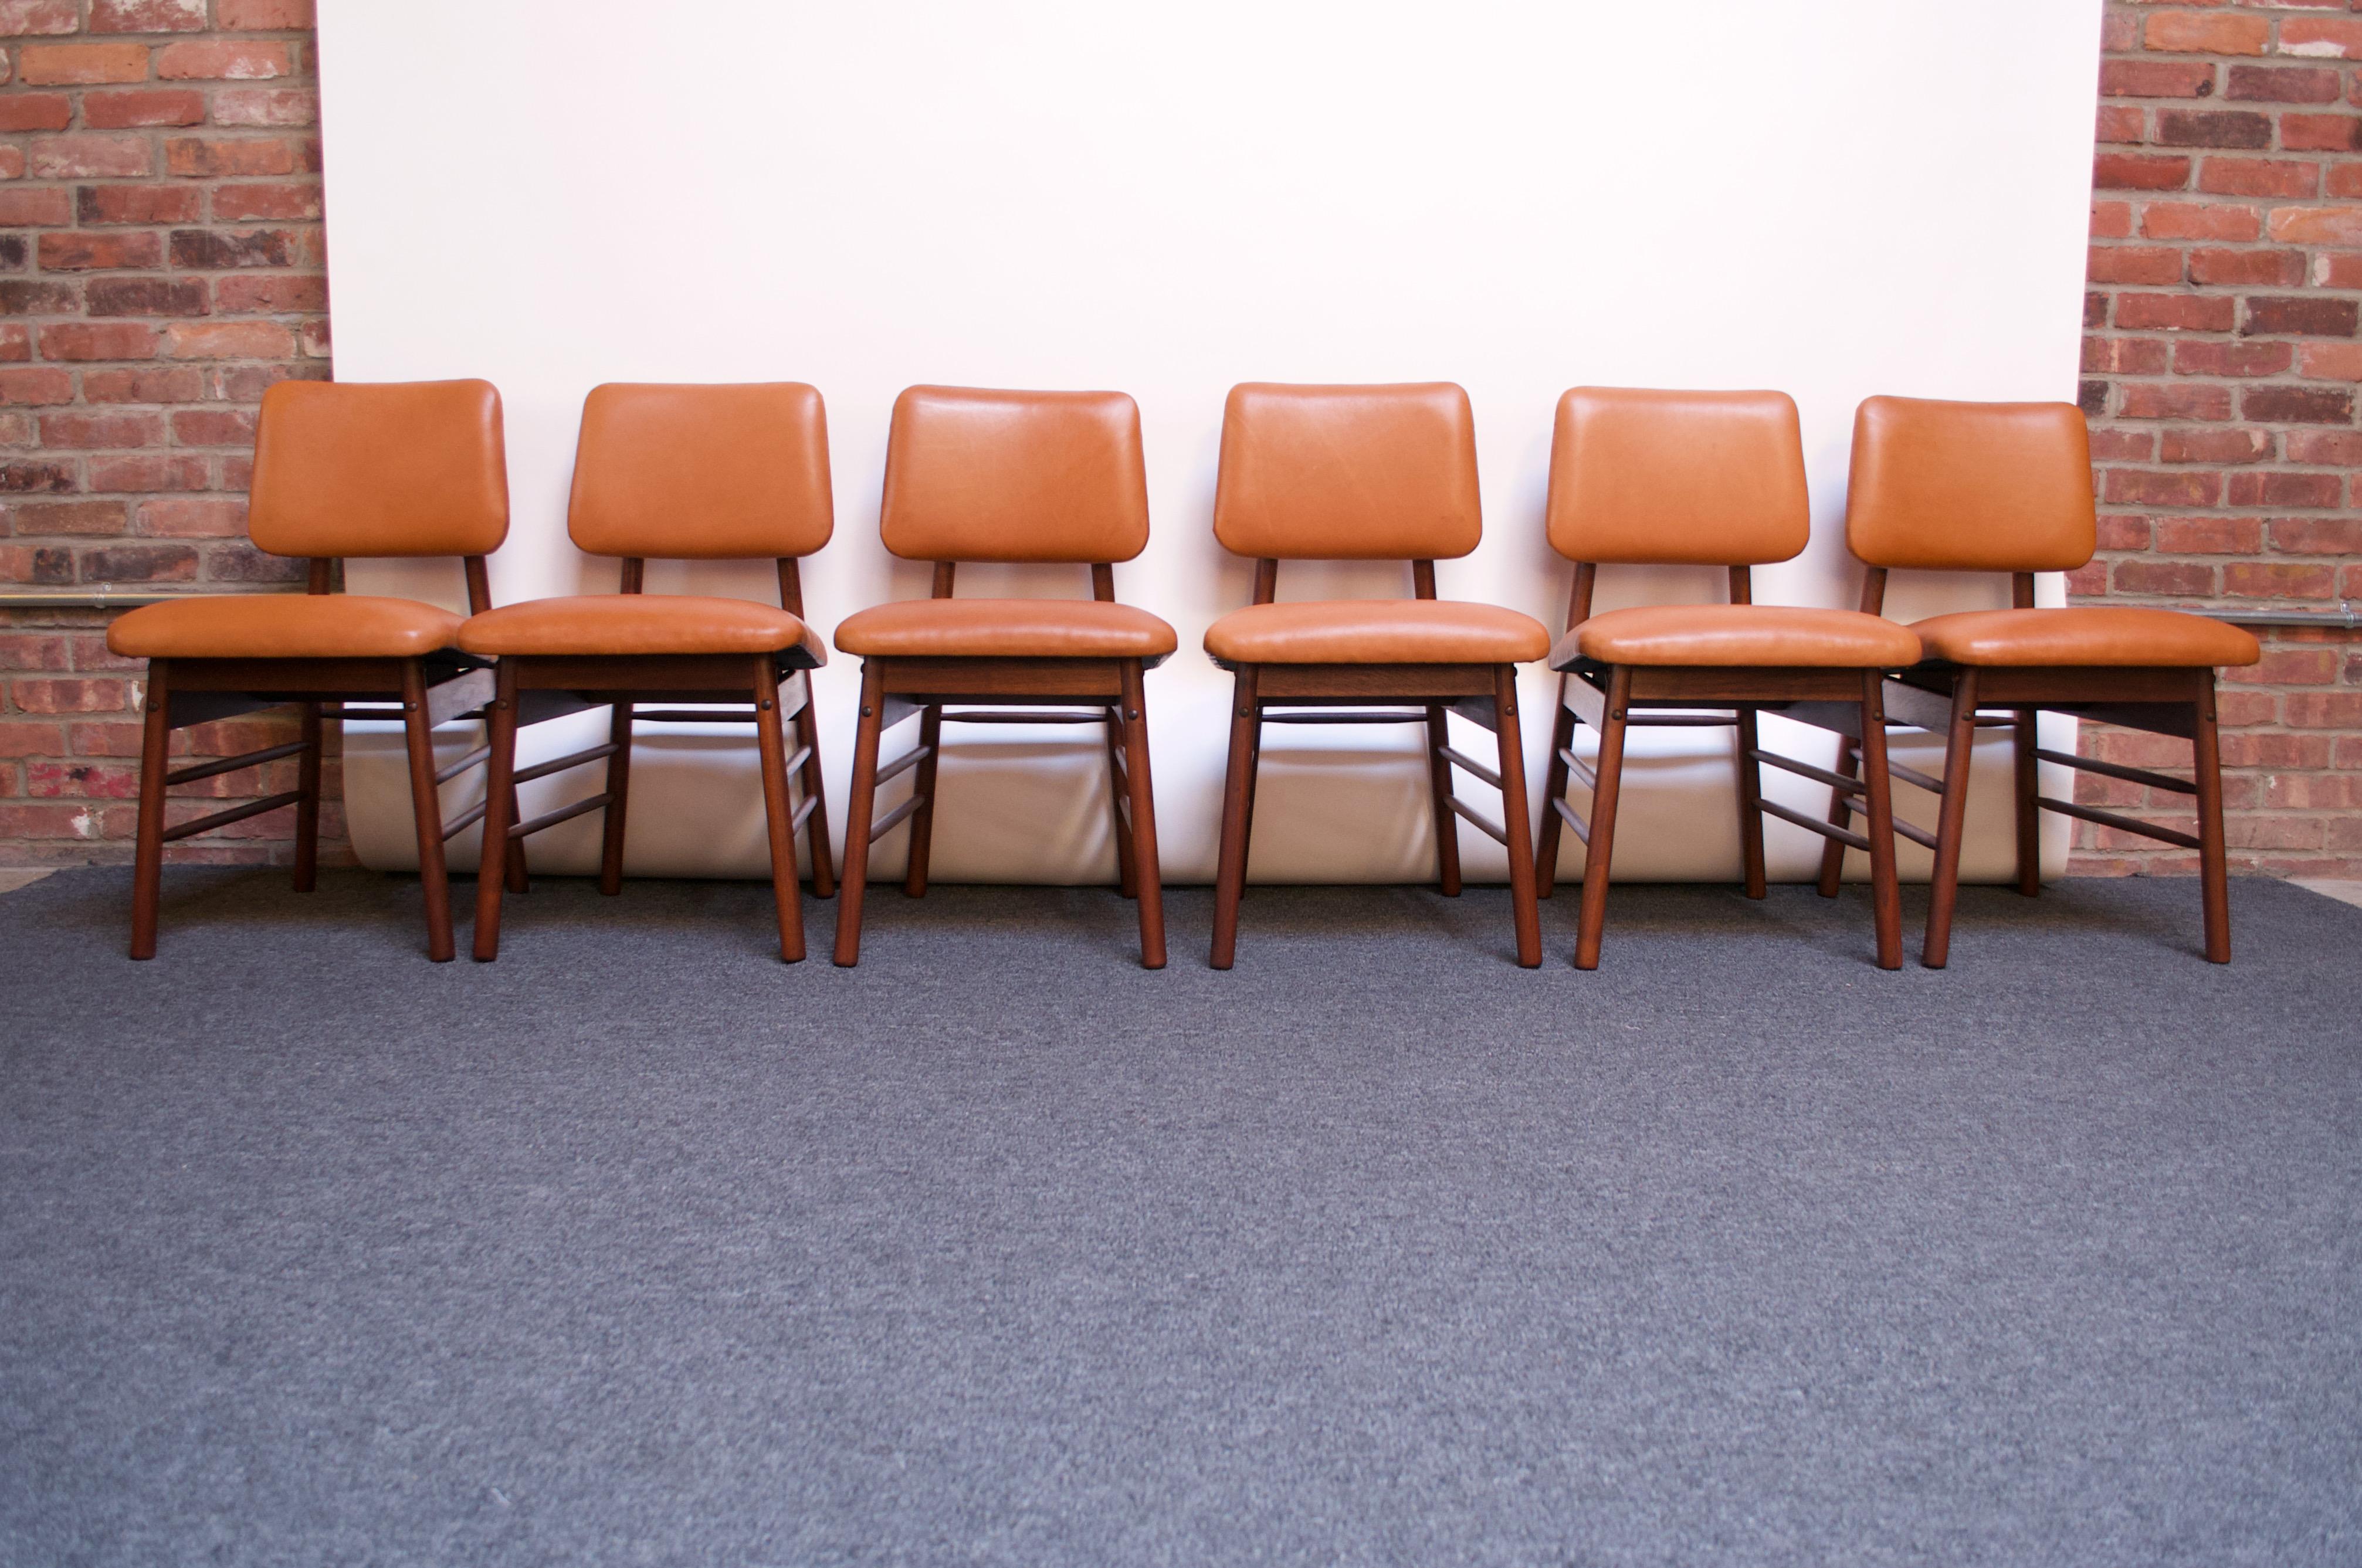 American Set of Six Walnut and Leather Dining Chairs by Greta Grossman